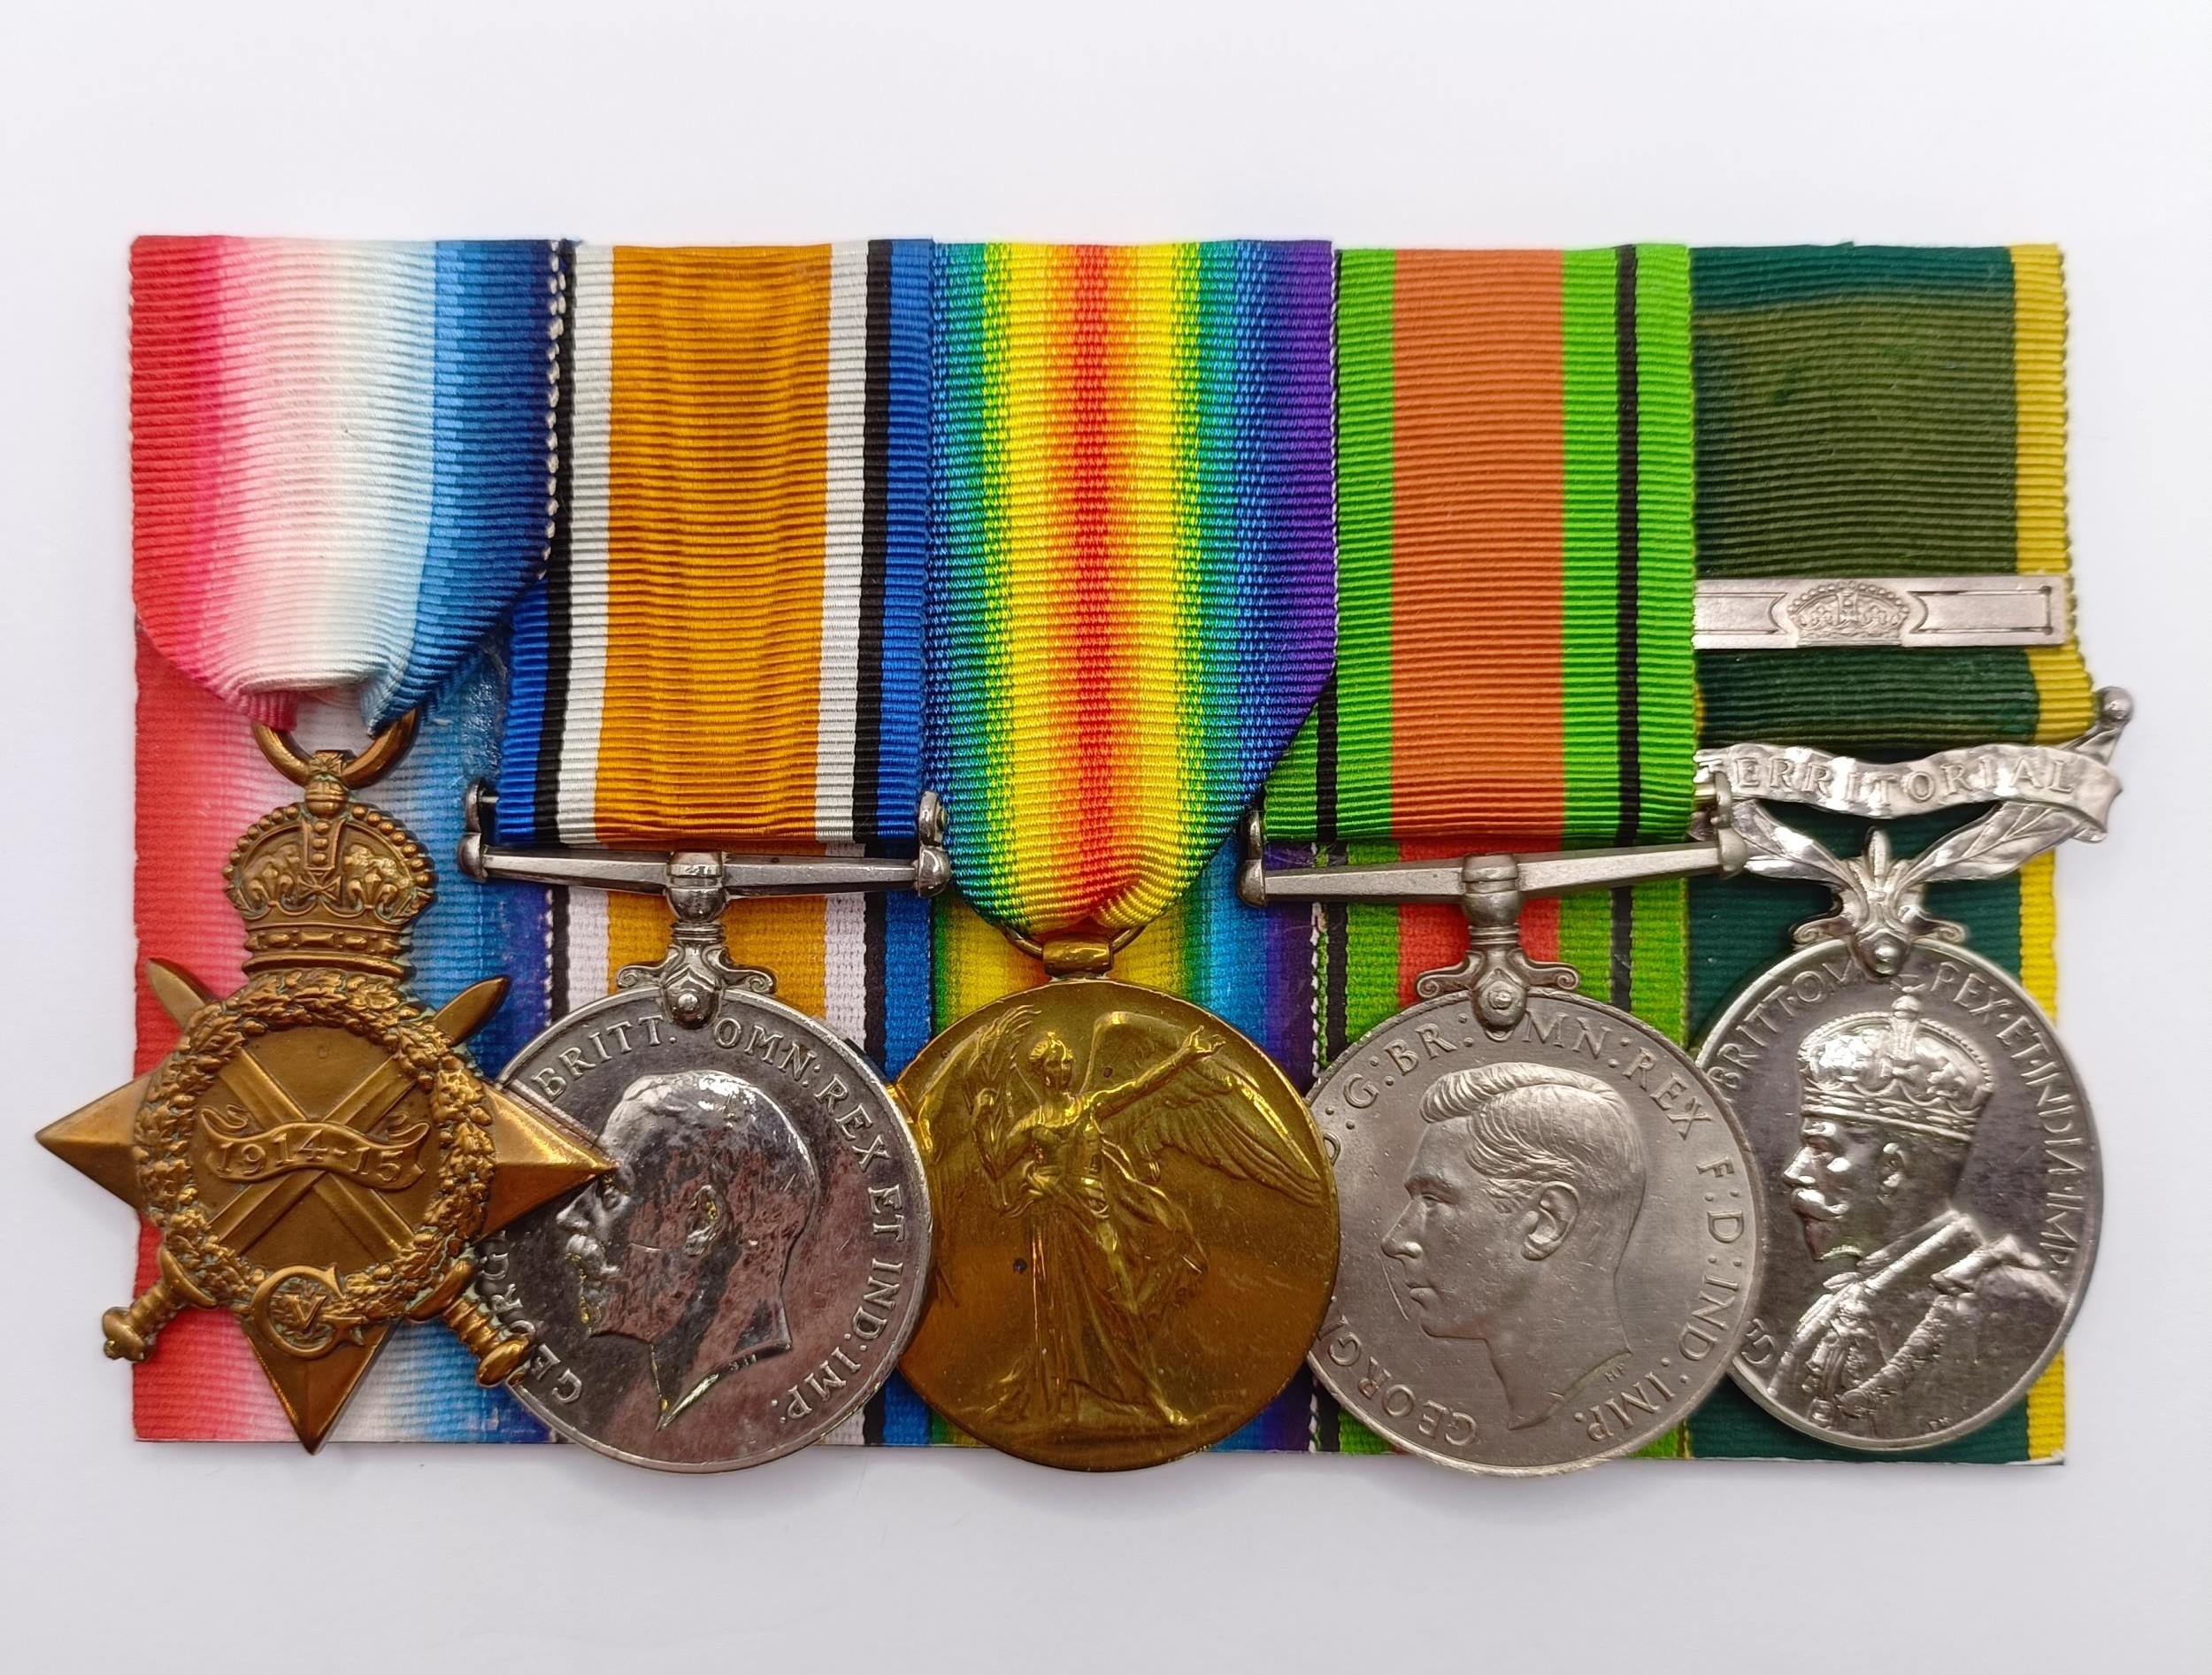 A group of five medals, awarded to 1506 Pte H P Sebborne 15/London R, comprising a 1914-15 Star